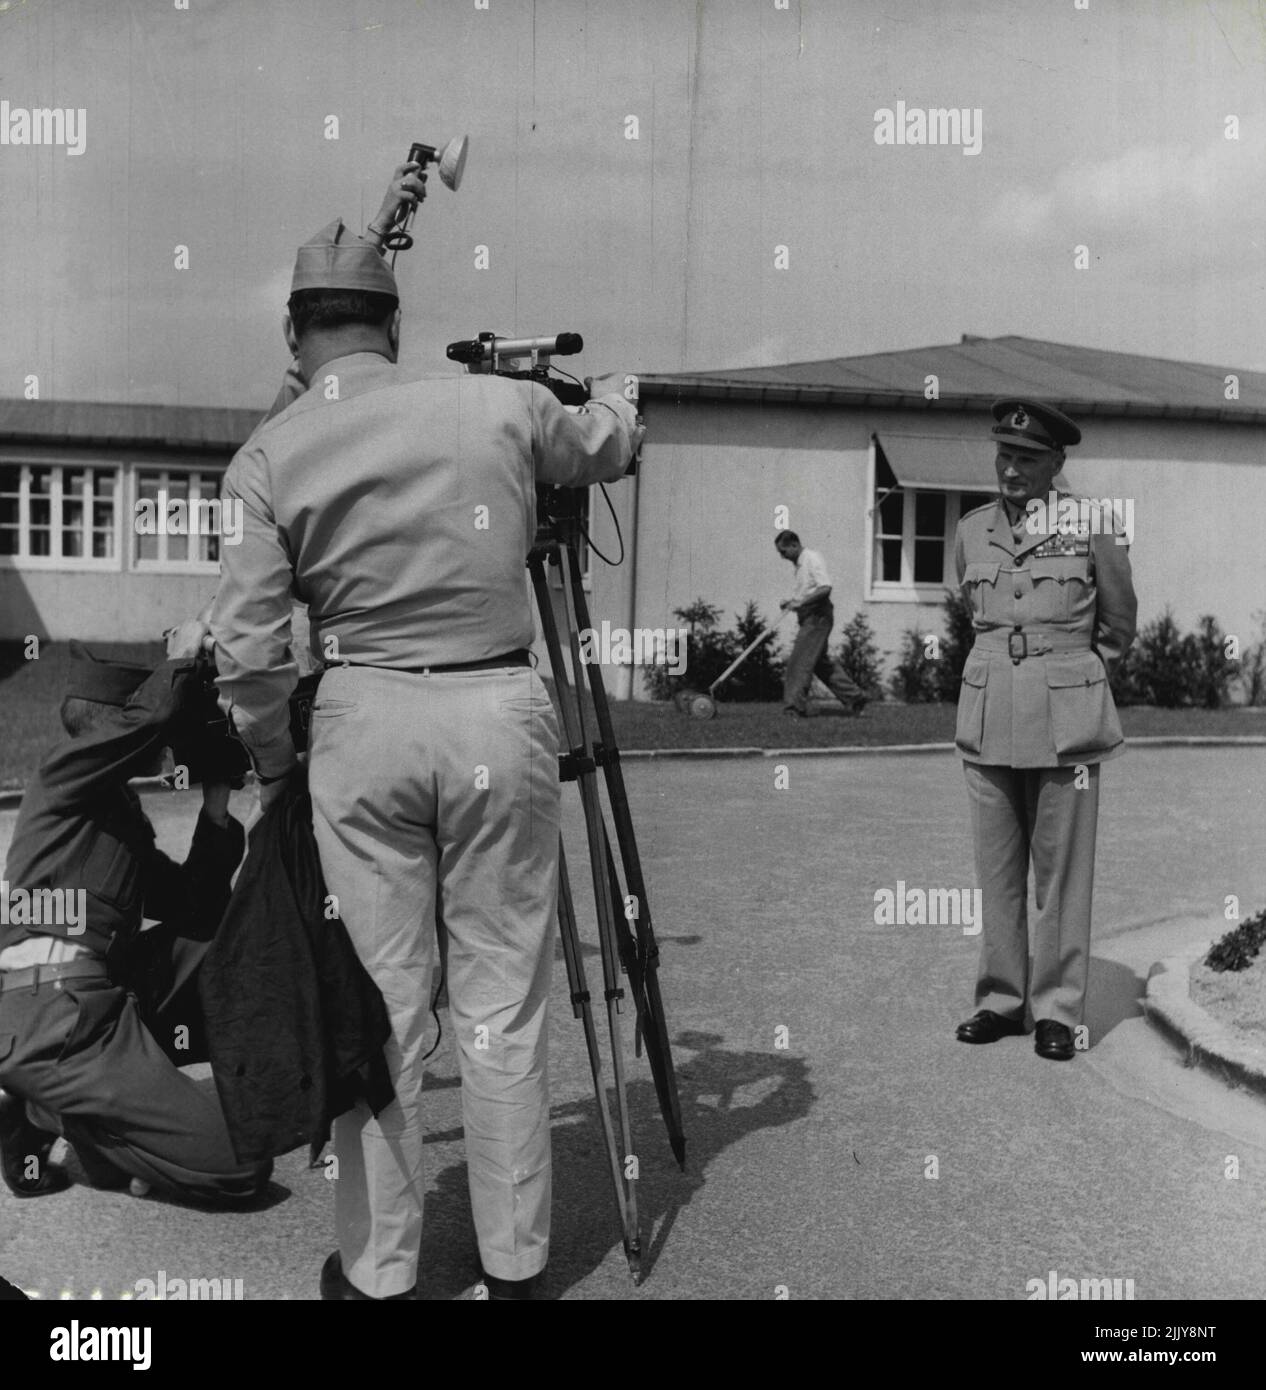 Field Marshal Montgomery - One of the tasks that has to be undertaken by the Deputy Commander is to pose for official propaganda photographs taken by the official photographers attached to the Supreme H.Q. January 10, 1955. (Photo by Jack Esten). Stock Photo